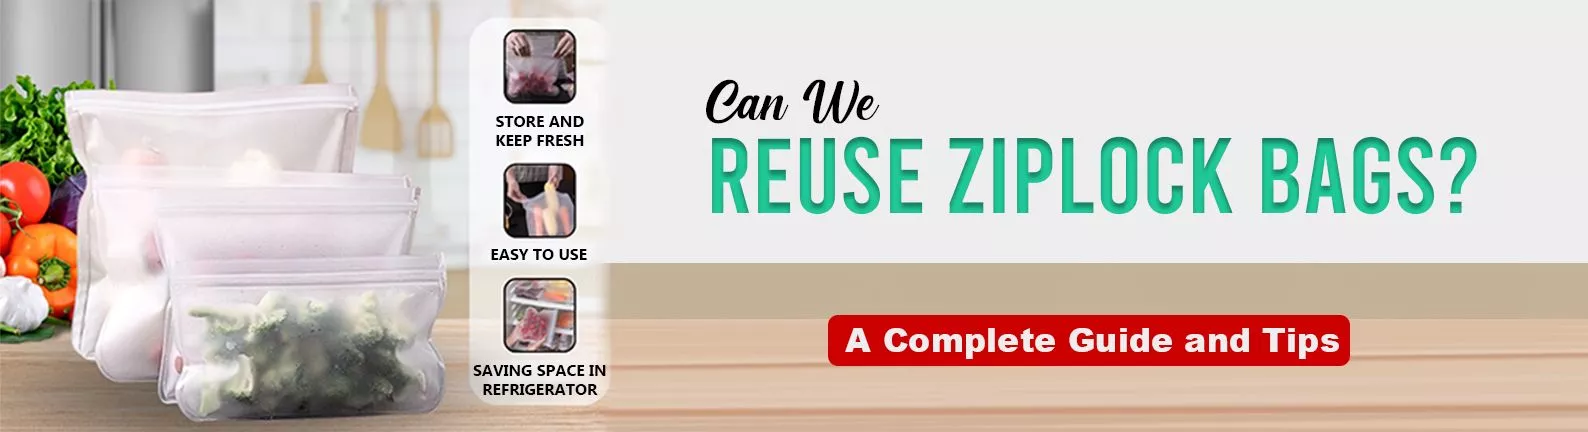 Can-We-Reuse-Ziplock-Bags-A-Complete-Guide-and-Tips